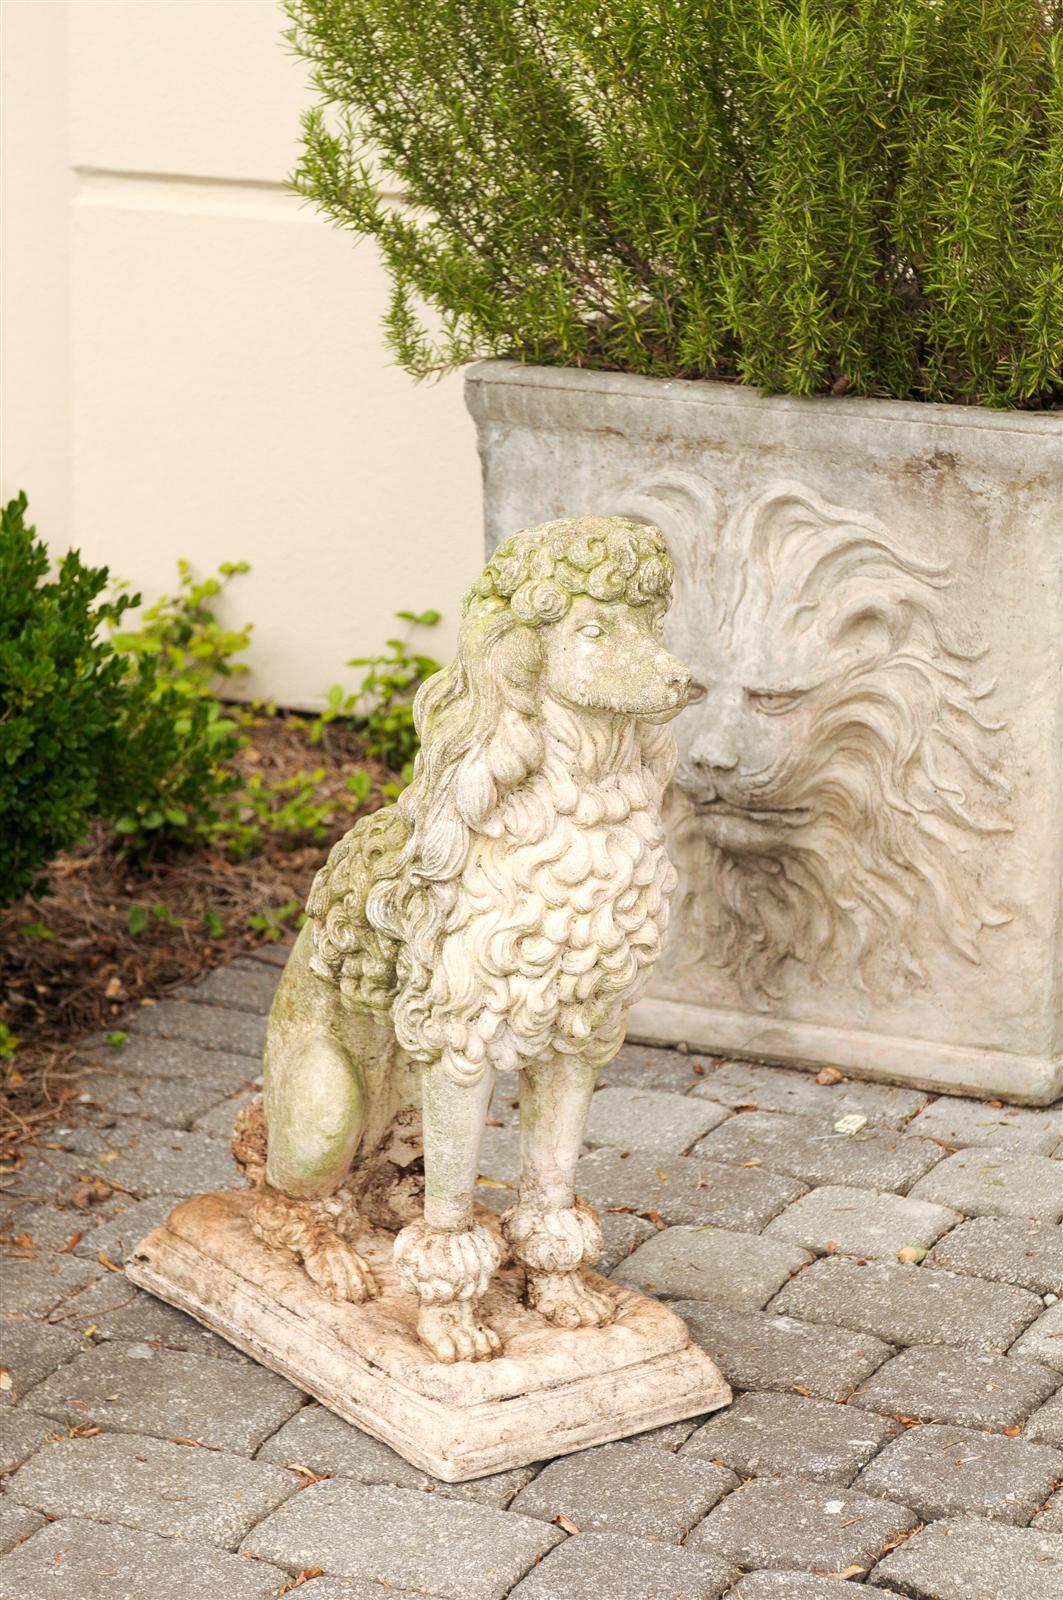 This English stone dog sculpture from the middle of the 20th century features a nicely groomed poodle. This sculpture is richly carved, with the poodle’s coat chock full of delicate curls. As if it were itself royalty, the dog sits in an